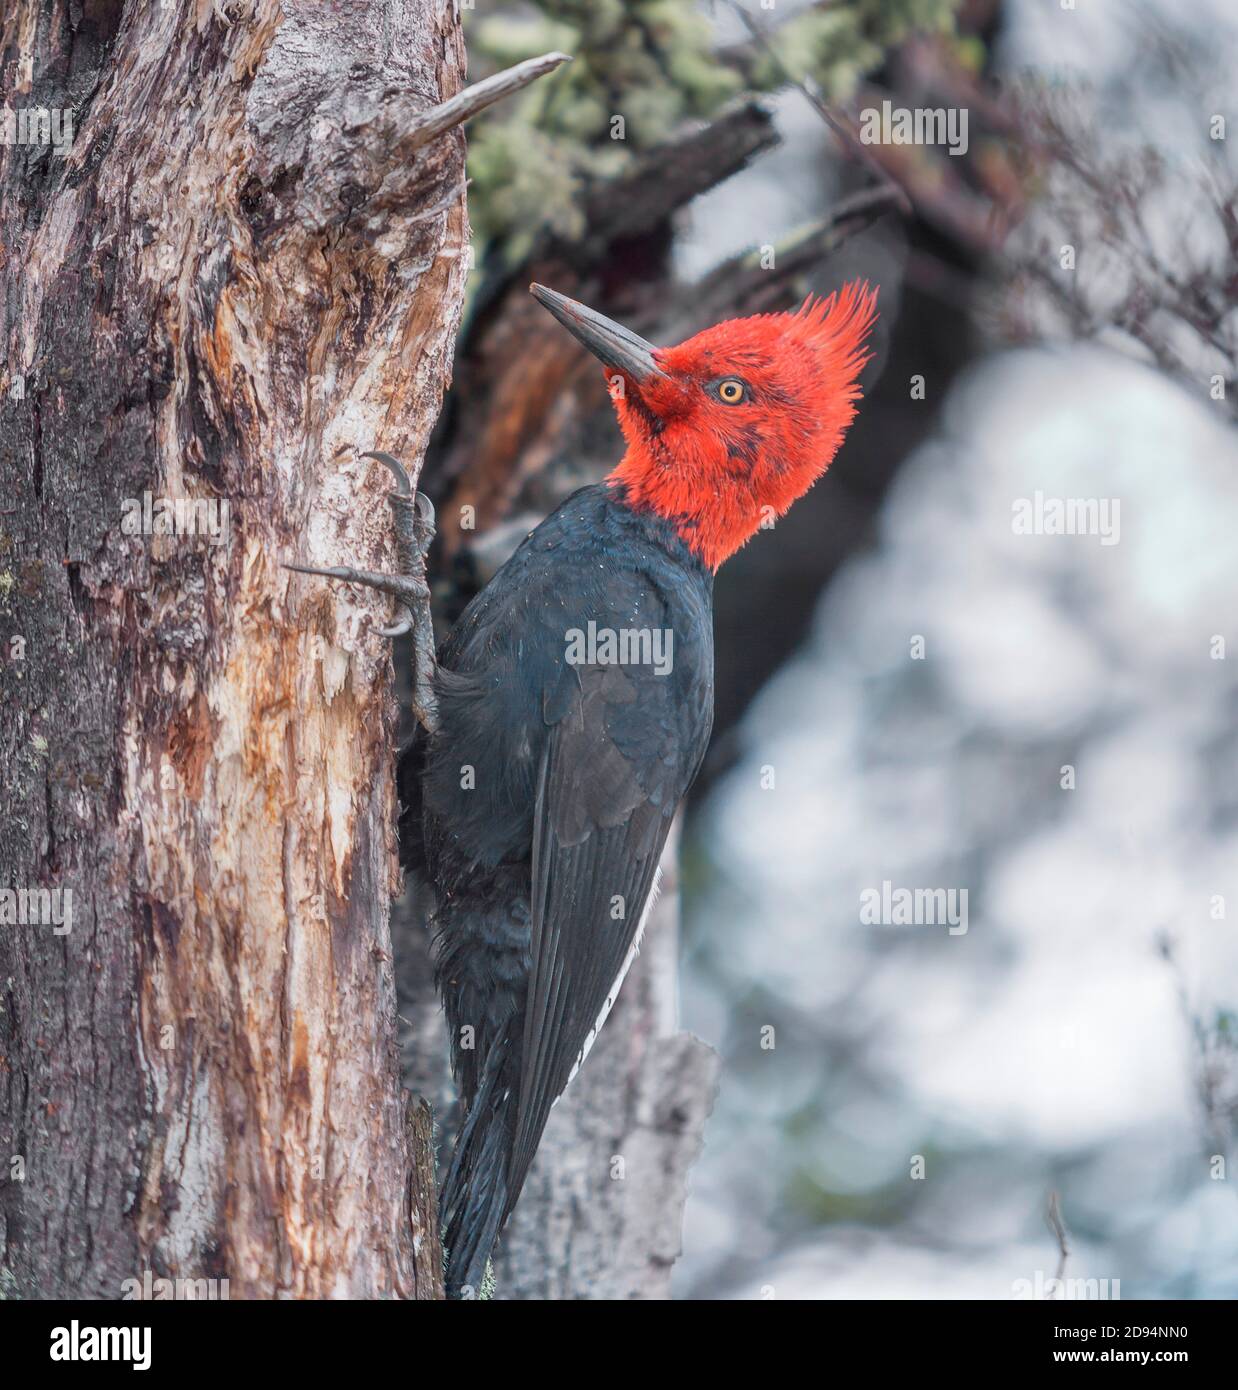 Male Magellanic Woodpecker (Compephilus magellanicus), Torres del Paine National Park, Chile, South America. Stock Photo